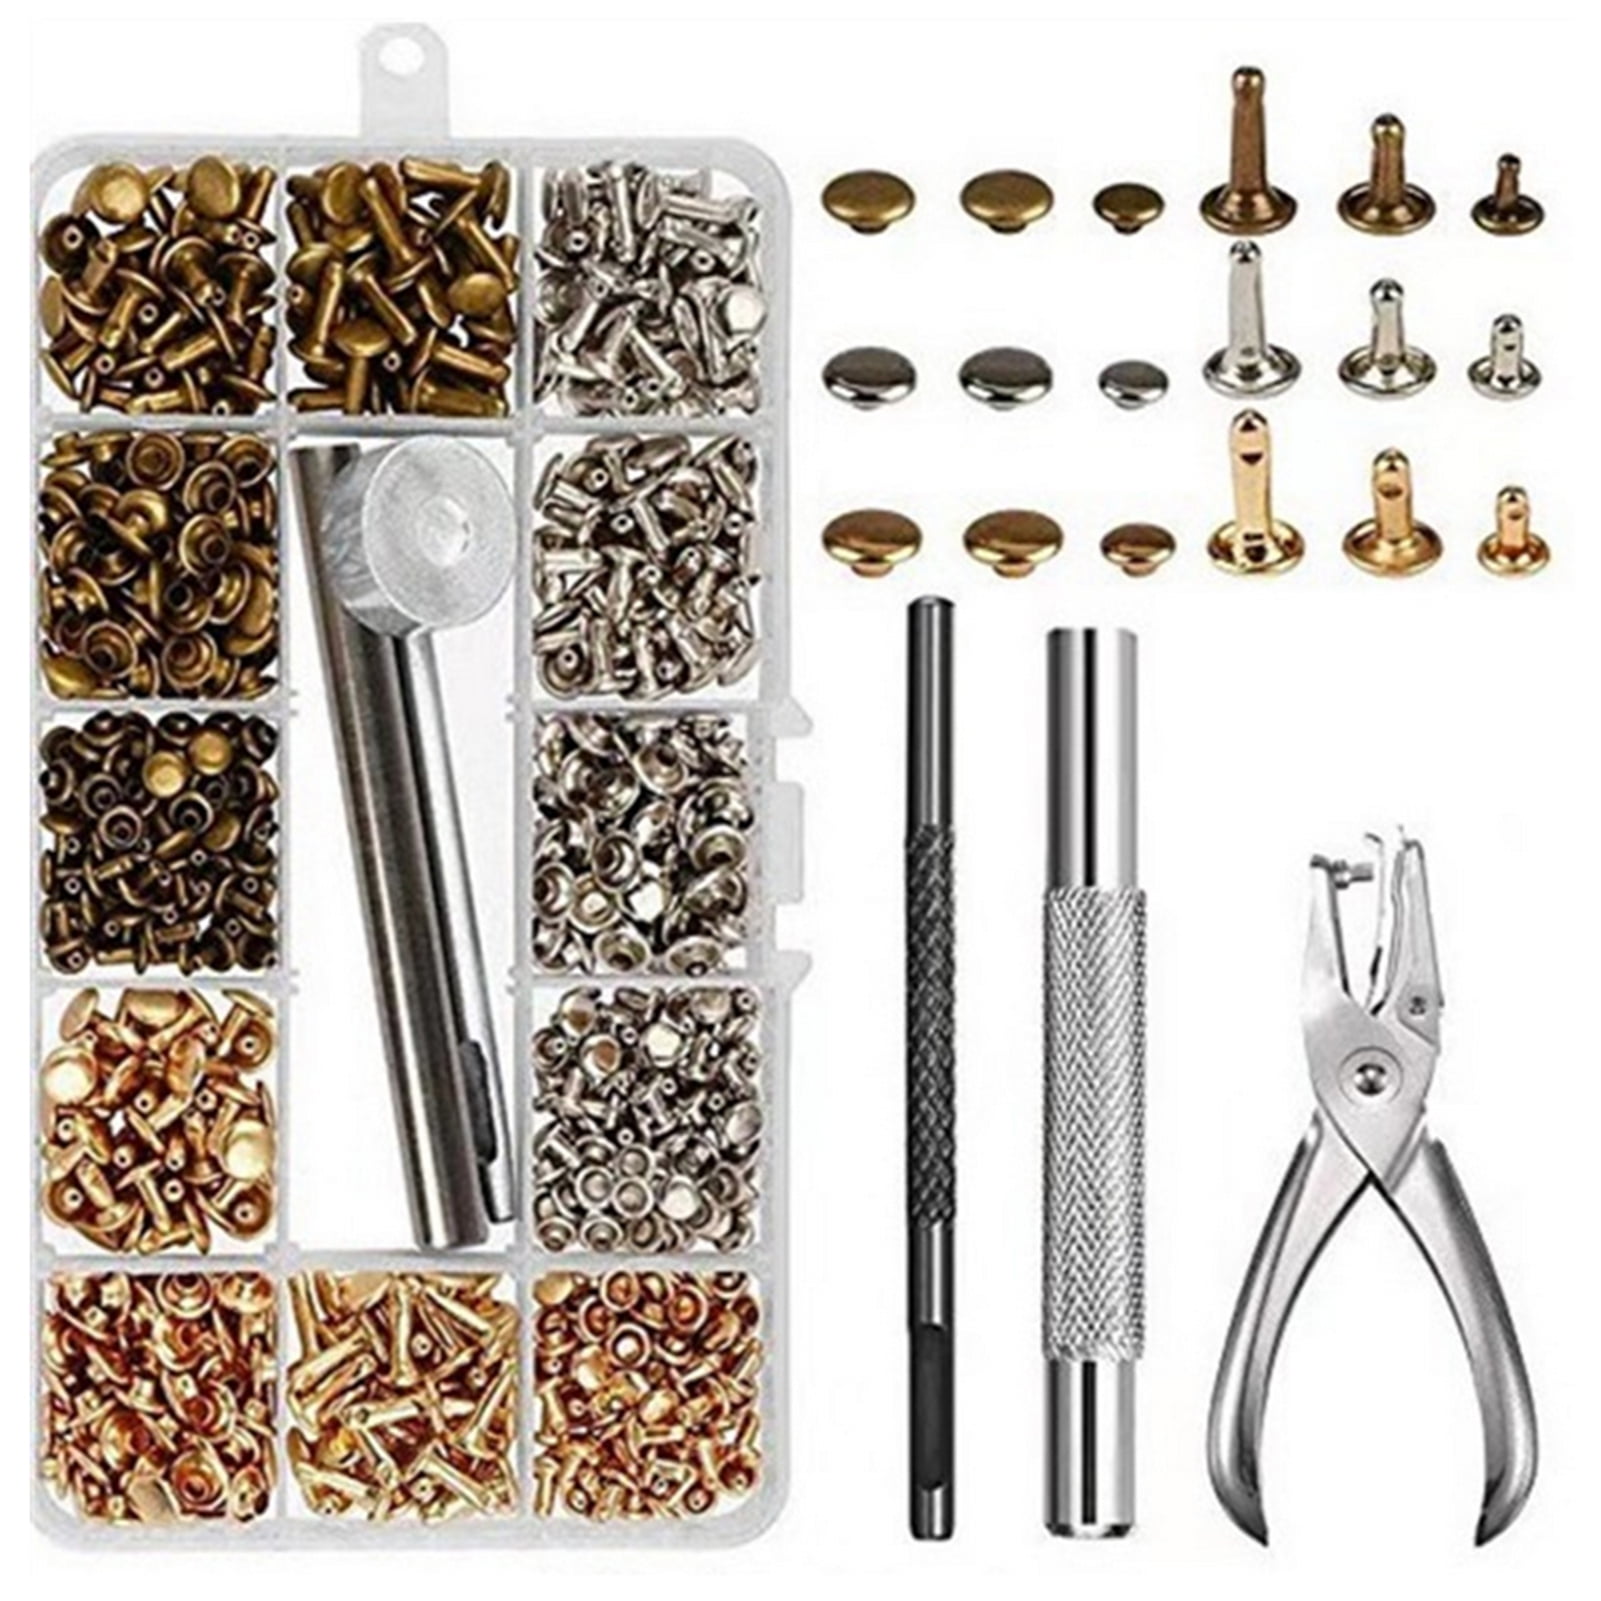 Meterk 300 Sets Leather Rivets Double Cap Rivet Tubular Metal Studs With  Punch Pliers Fixing Set Tools For Diy Leather Craft 